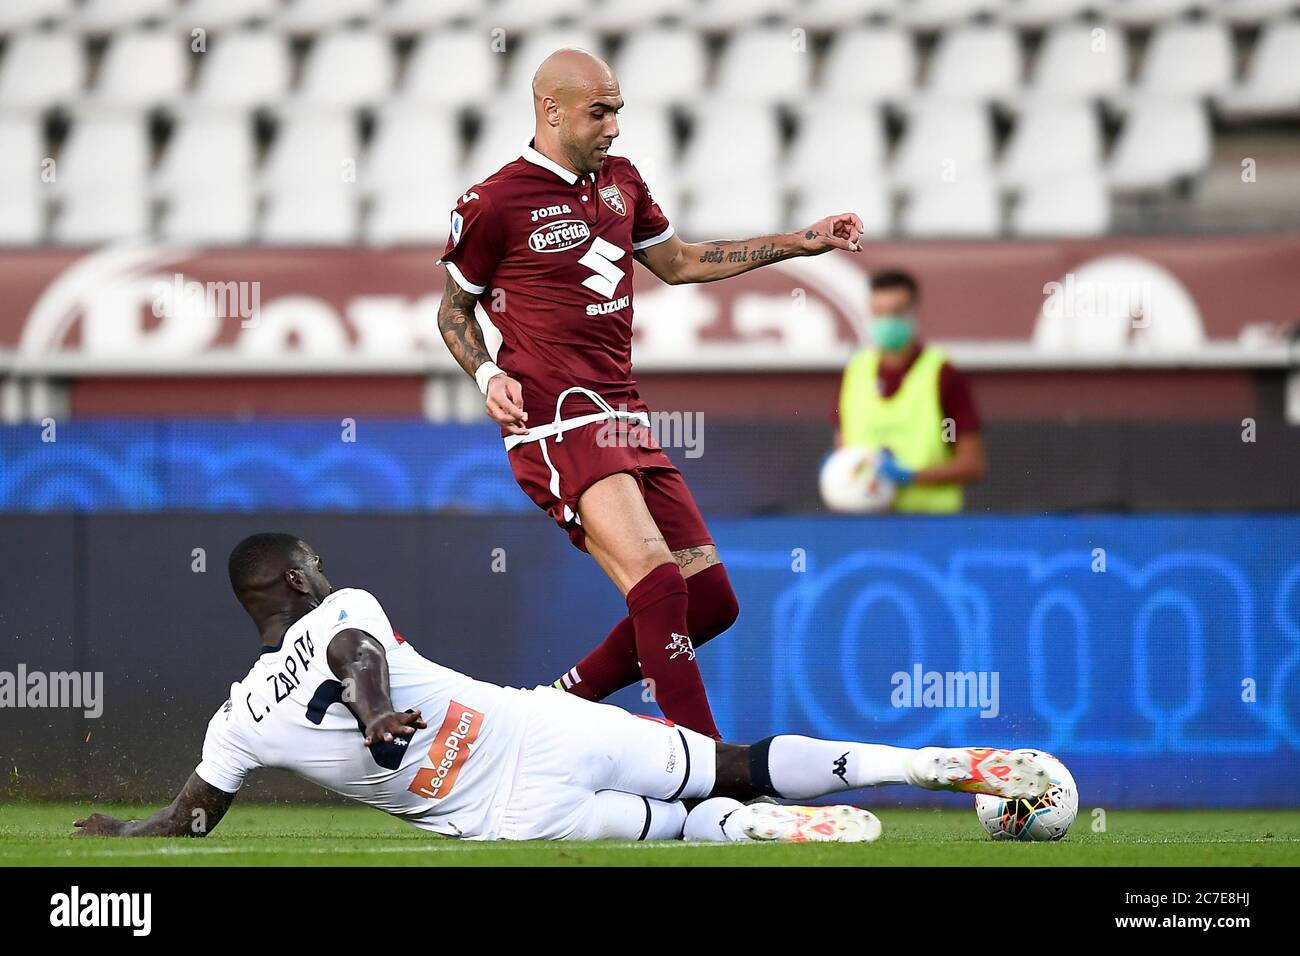 Turin, Italy. 16th July, 2020. TURIN, ITALY - July 16, 2020: Simone Zaza of Torino FC is tackled by Cristian Zapata of Genoa CFC during the Serie A football match between Torino FC and Genoa CFC. (Photo by Nicolò Campo/Sipa USA) Credit: Sipa USA/Alamy Live News Stock Photo